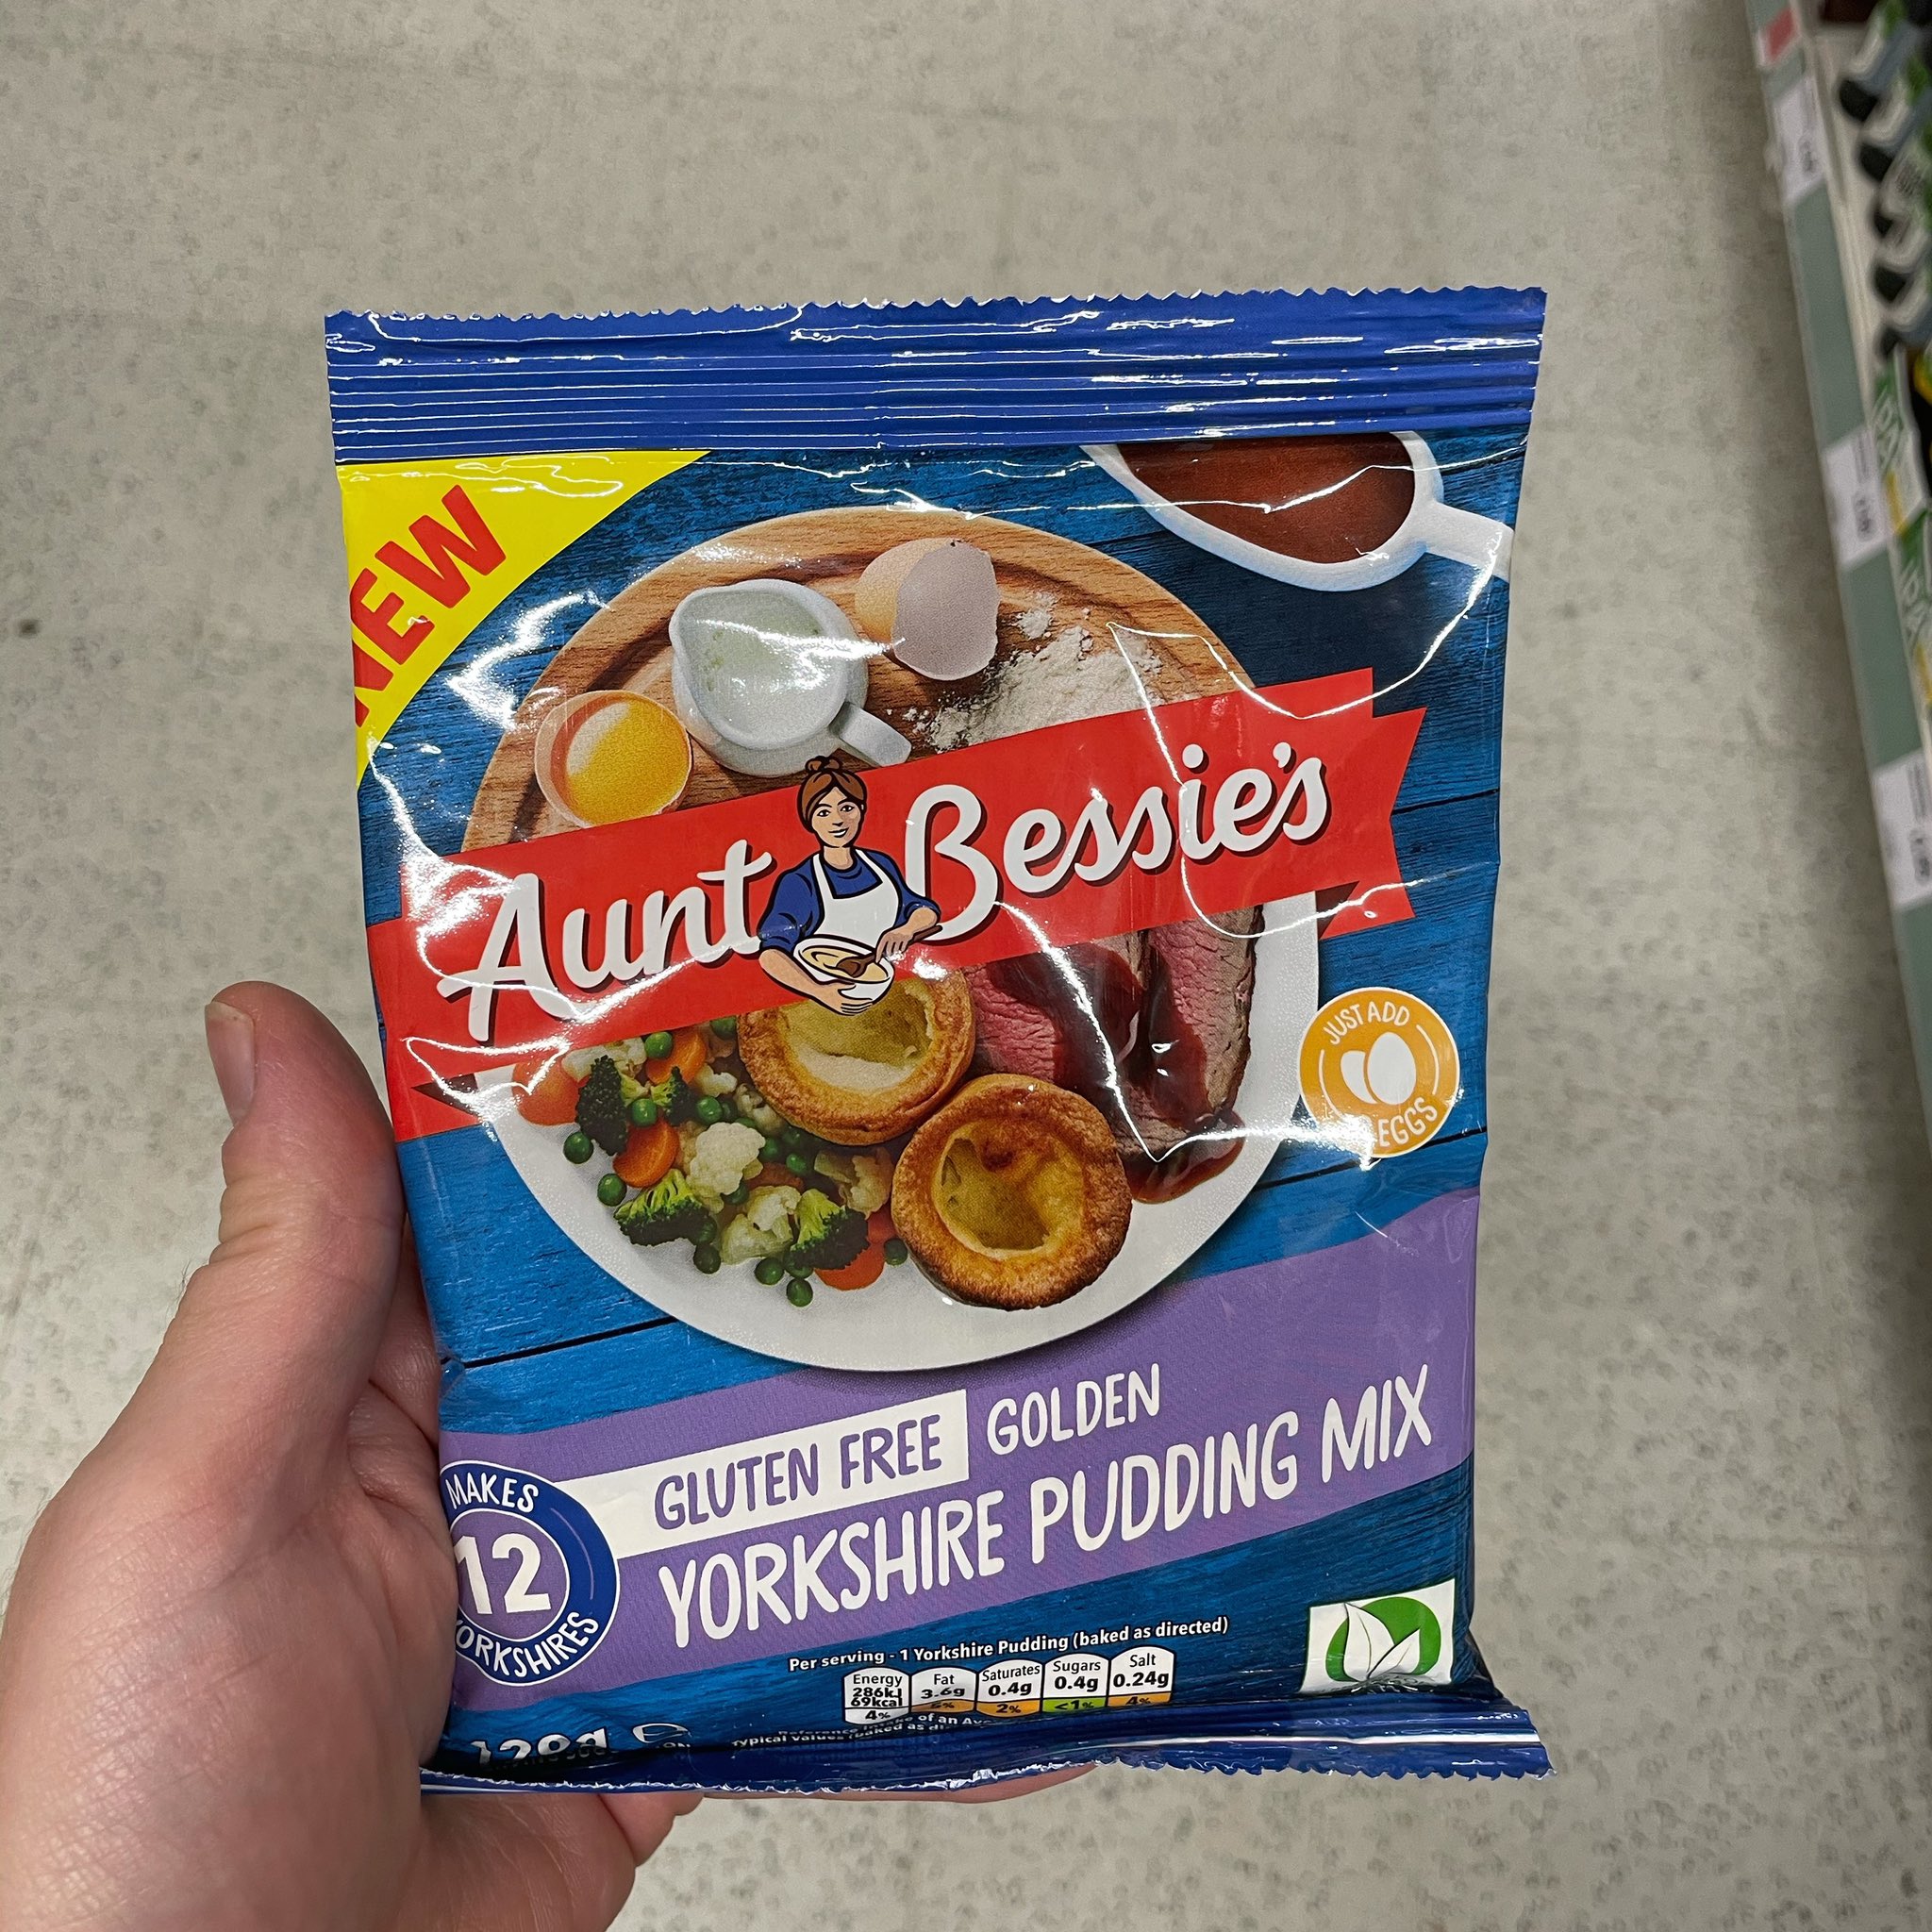 Well This Is on Twitter: "Aunt Bessie's Gluten Free Yorkshire Pudding Mix! 🍽 At Sainsbury's @AuntBessies #auntbessie #glutenfree # yorkshirepudding #roastdinner #wellthisisnew https://t.co/jeGUcZpIJ8" Twitter